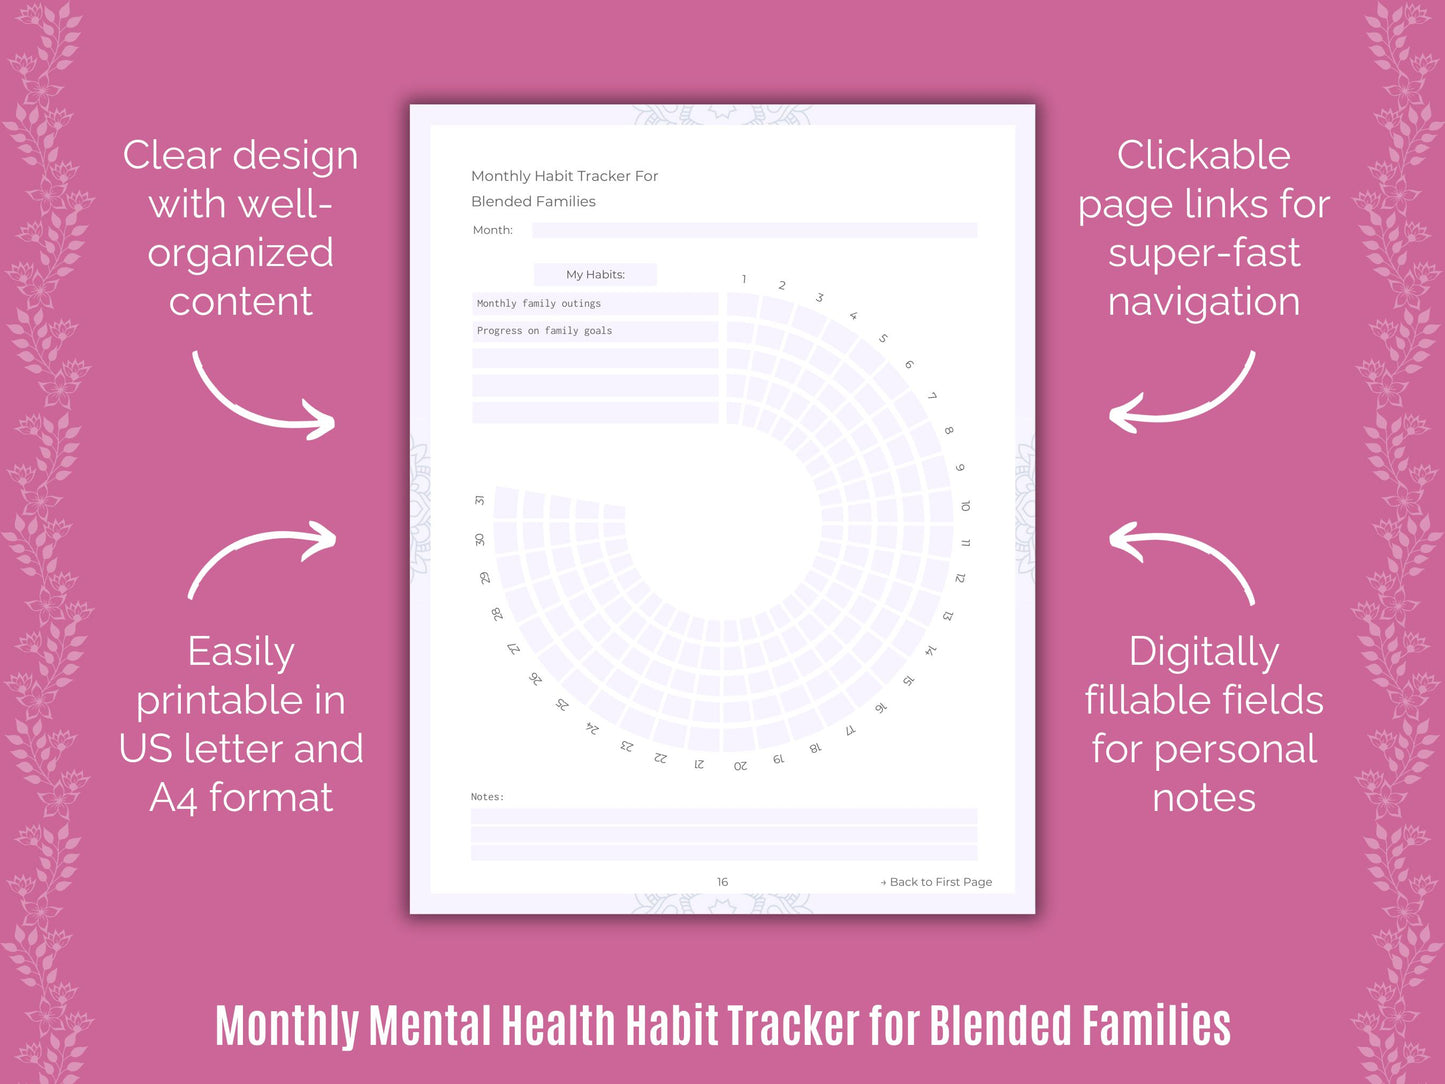 Cheat Sheet, Goal Setting, Tools, Therapy, Templates, Resources, Counseling, Workbooks, Planners, Journals, Journaling, Blended Families Mental Health, Notes